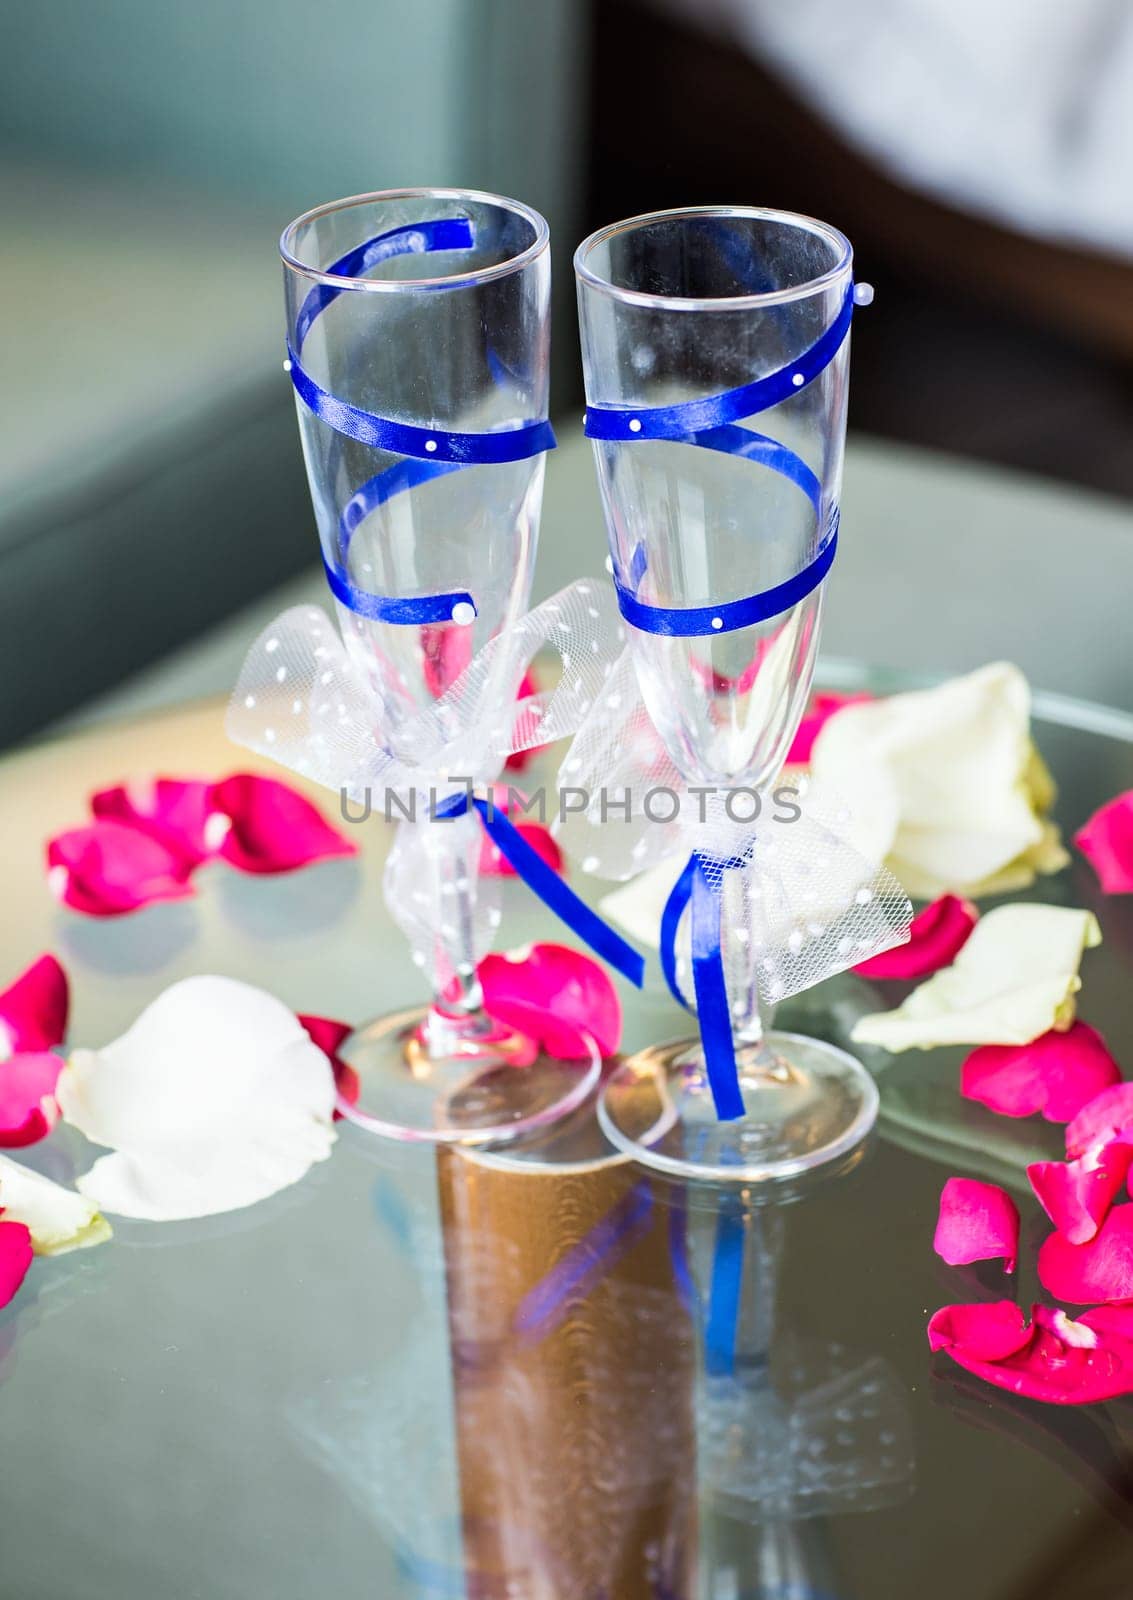 Close-up of wedding decorated champagne glasses on the table by Satura86